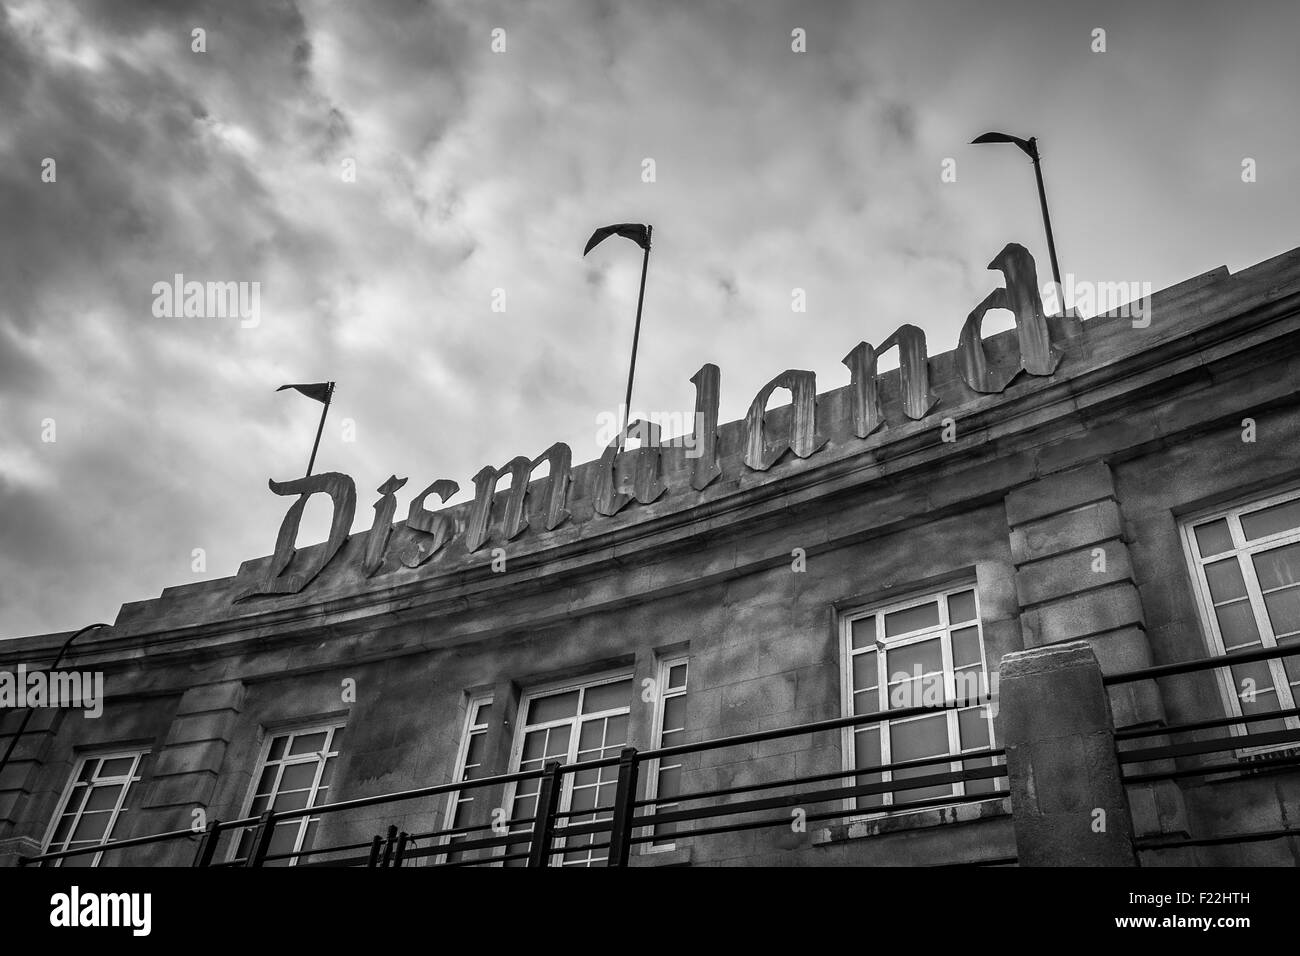 WESTON-SUPER-MARE, UK - SEPTEMBER 3 2015: The sign at the entrance to Banksy's Dismaland Bemusement Park. Stock Photo